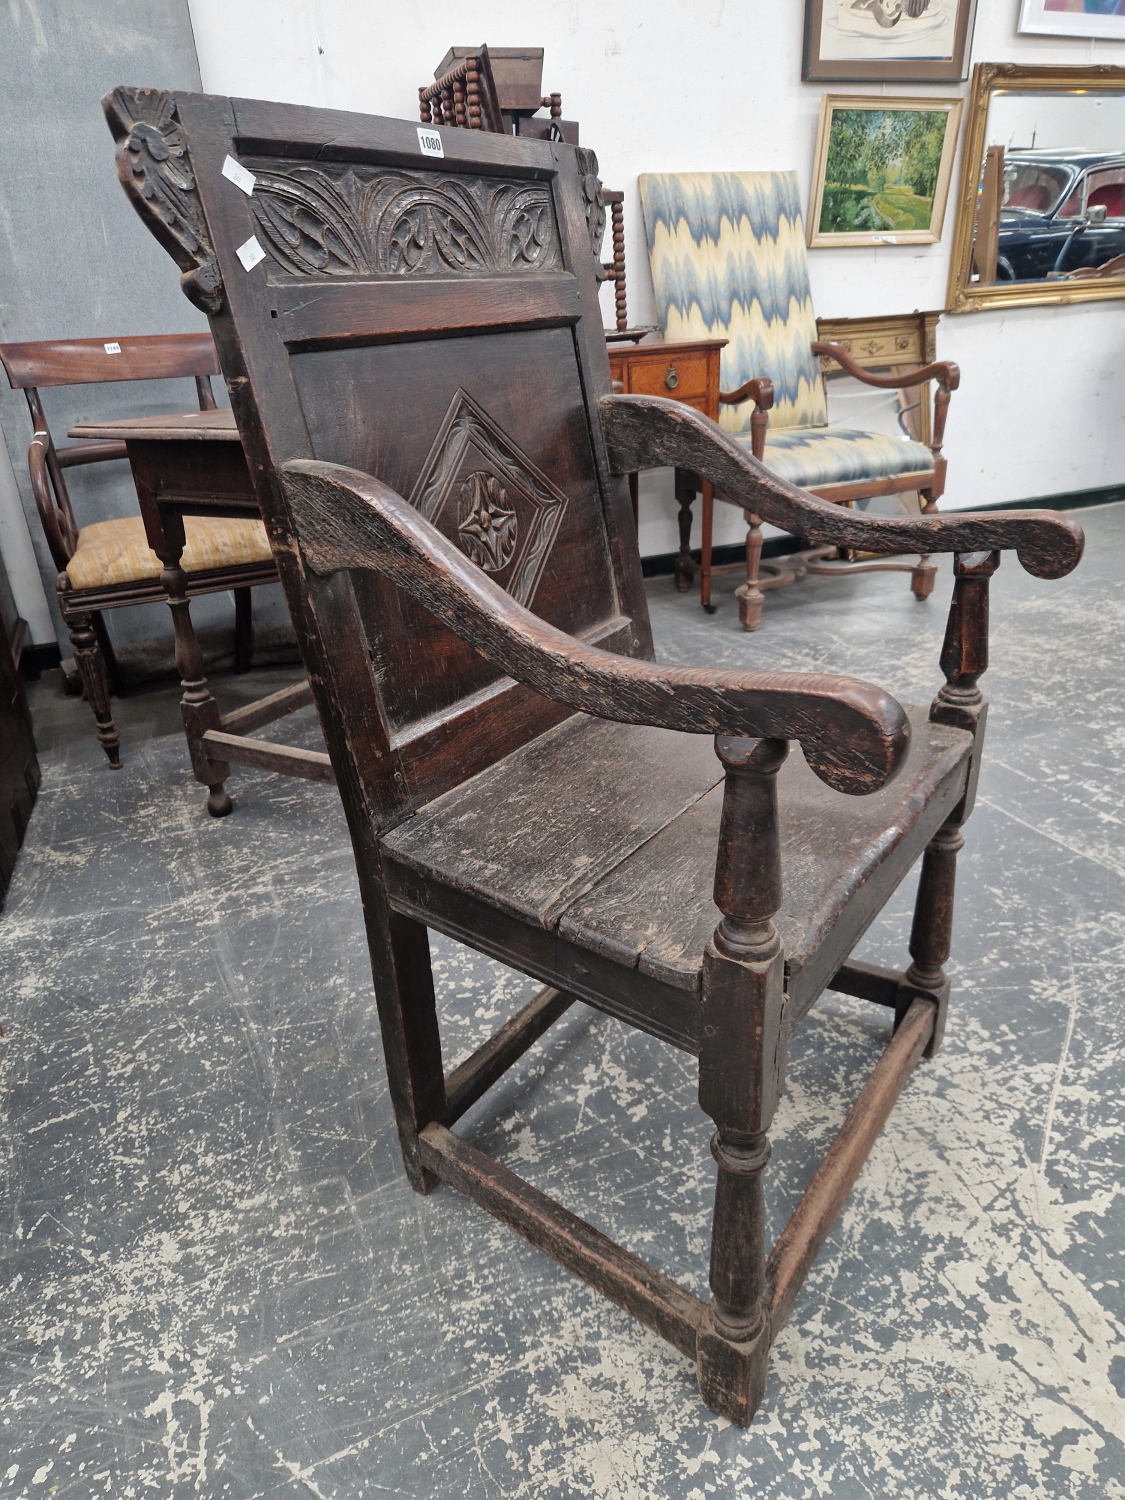 AN EARLY 18TH CENTURY WAINSCOTT CHAIR. - Image 2 of 6